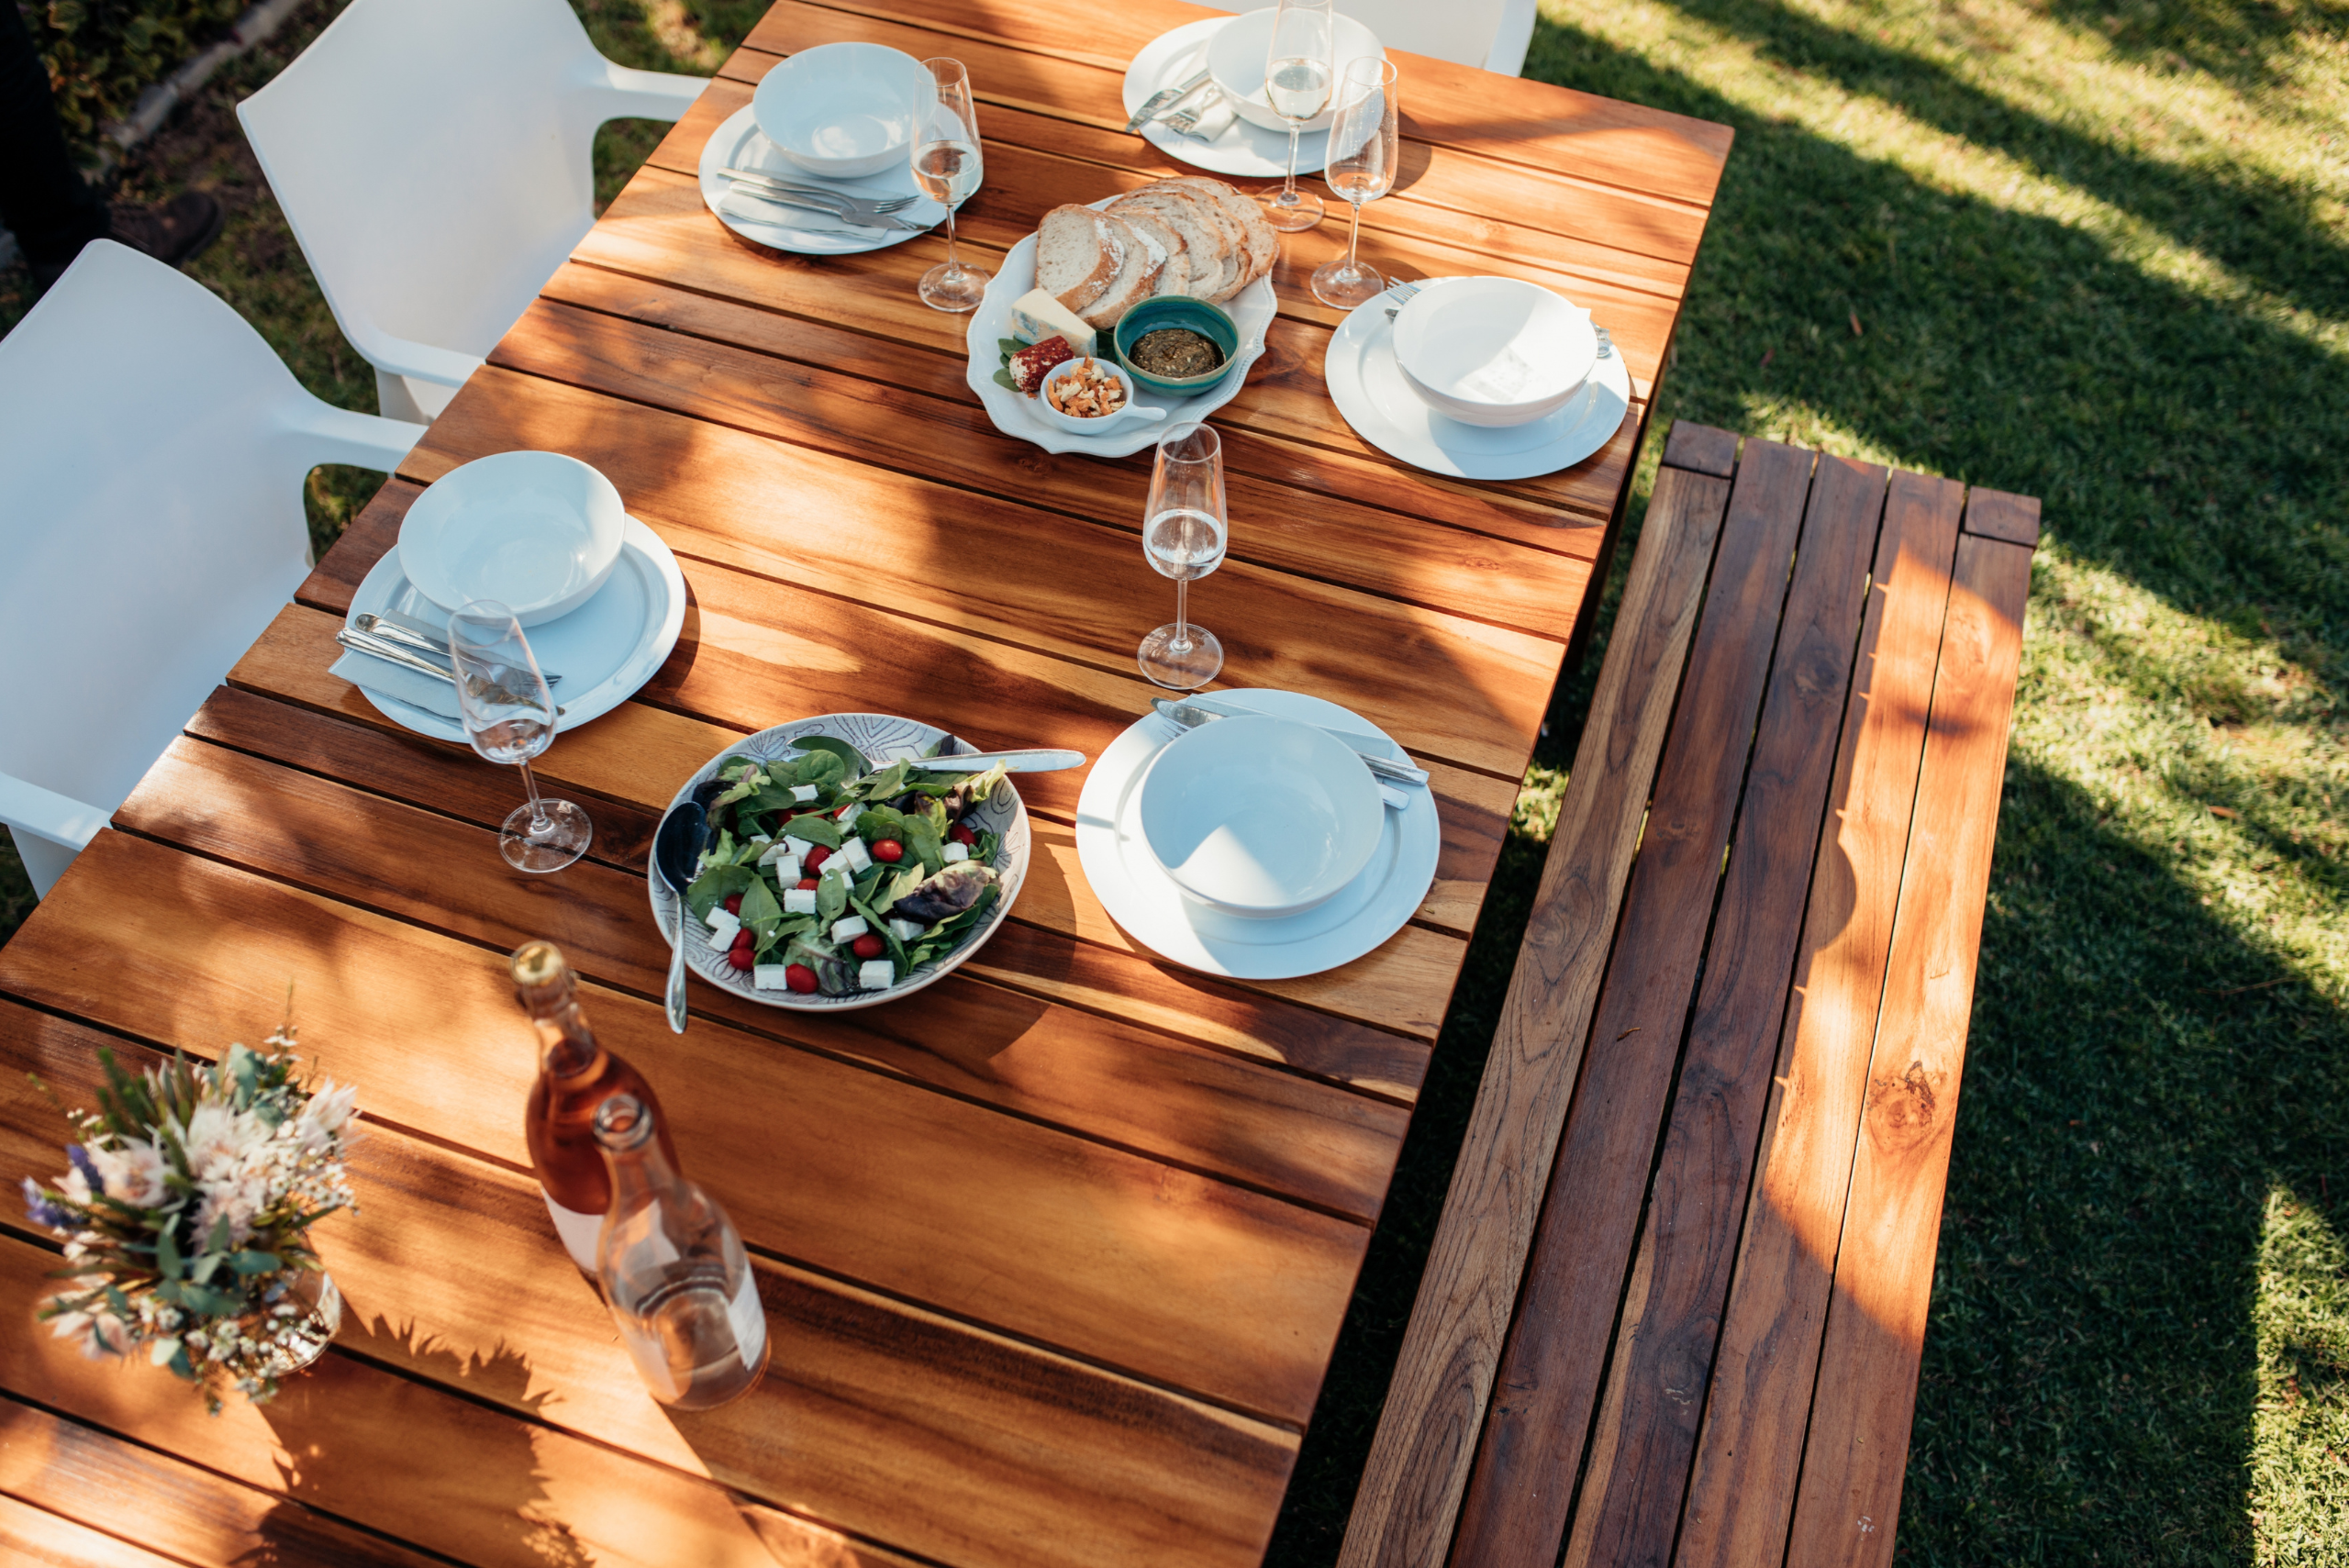 Wooden dining table with dishes and food.